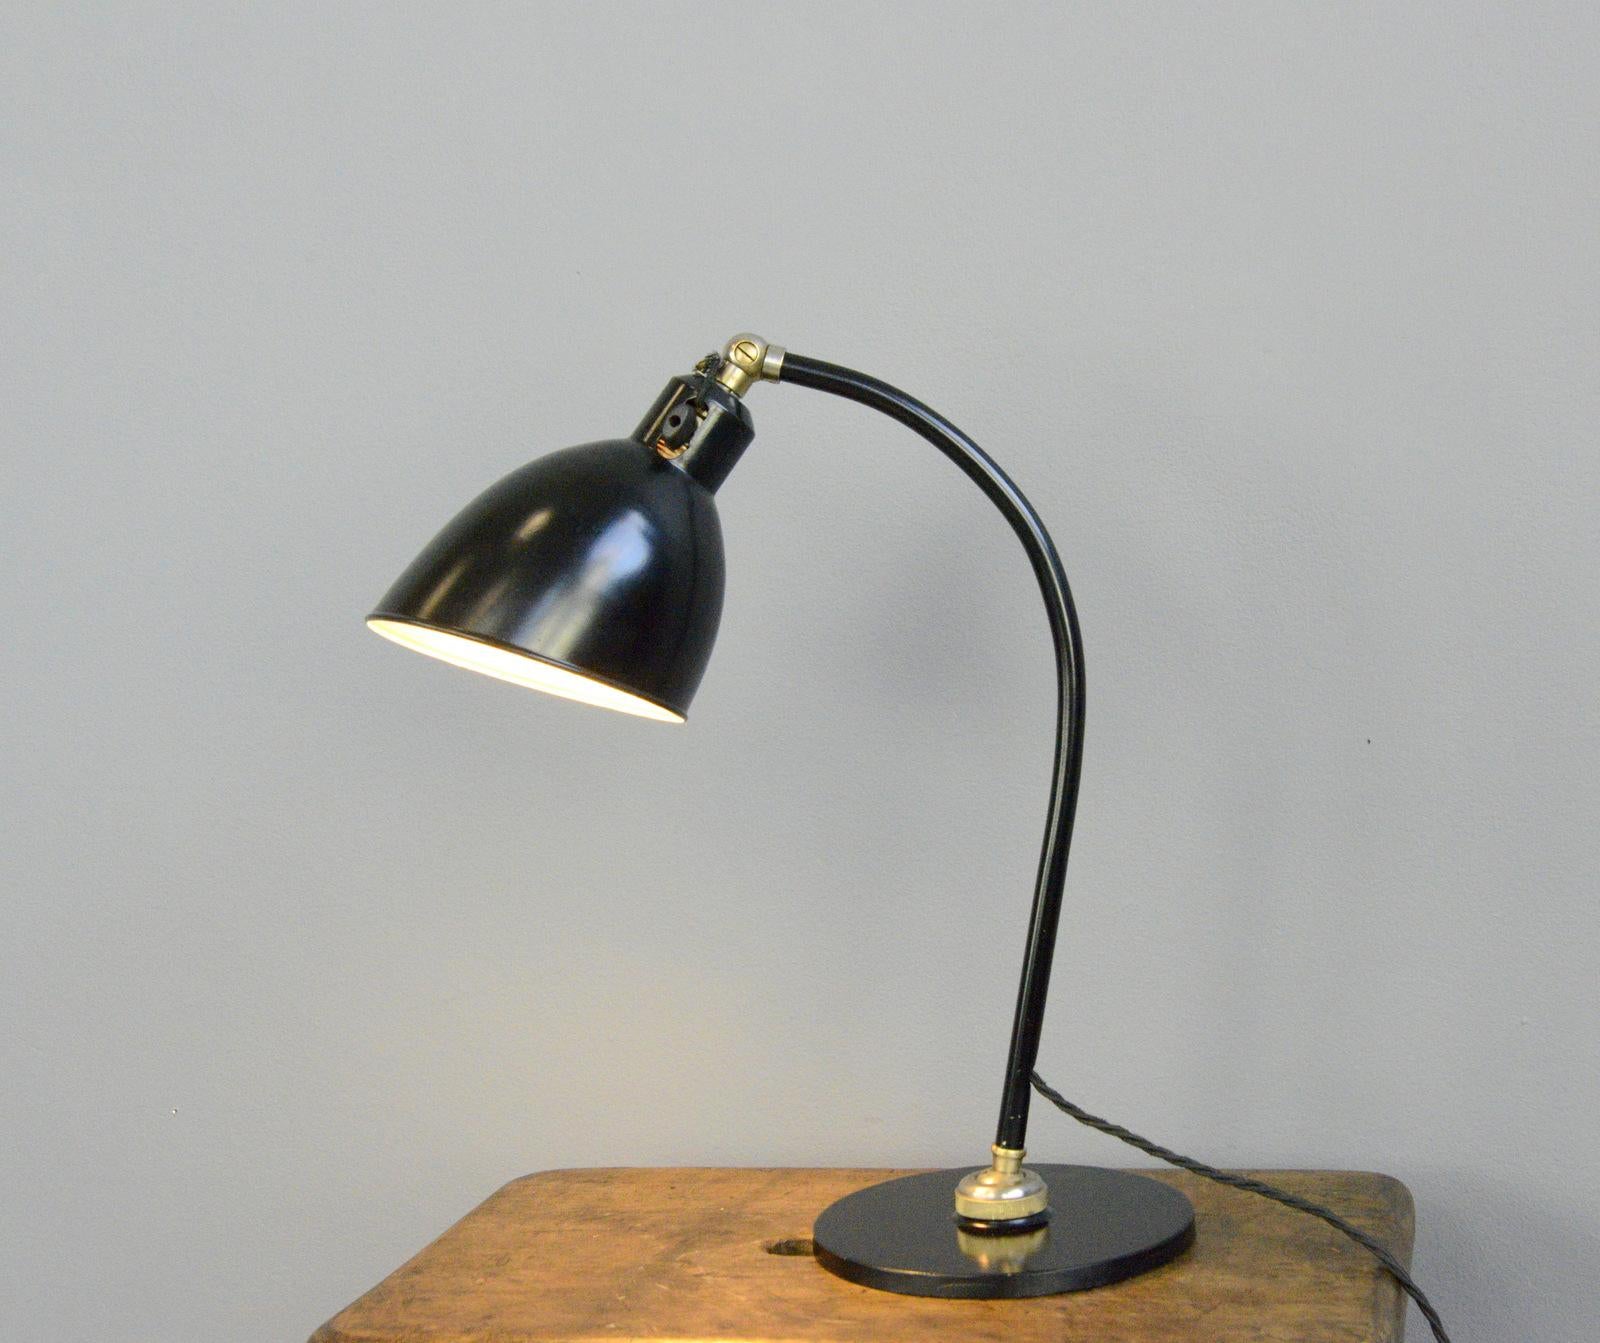 Polo popular desk lamp by Christian Dell for Rondella

- Heavy steel base
- Ball and socket joint allows for articulated movement
- Steel shade and arm
- Takes E27 fitting bulbs
- On/Off toggle switch on the shade
- Designed by Christian